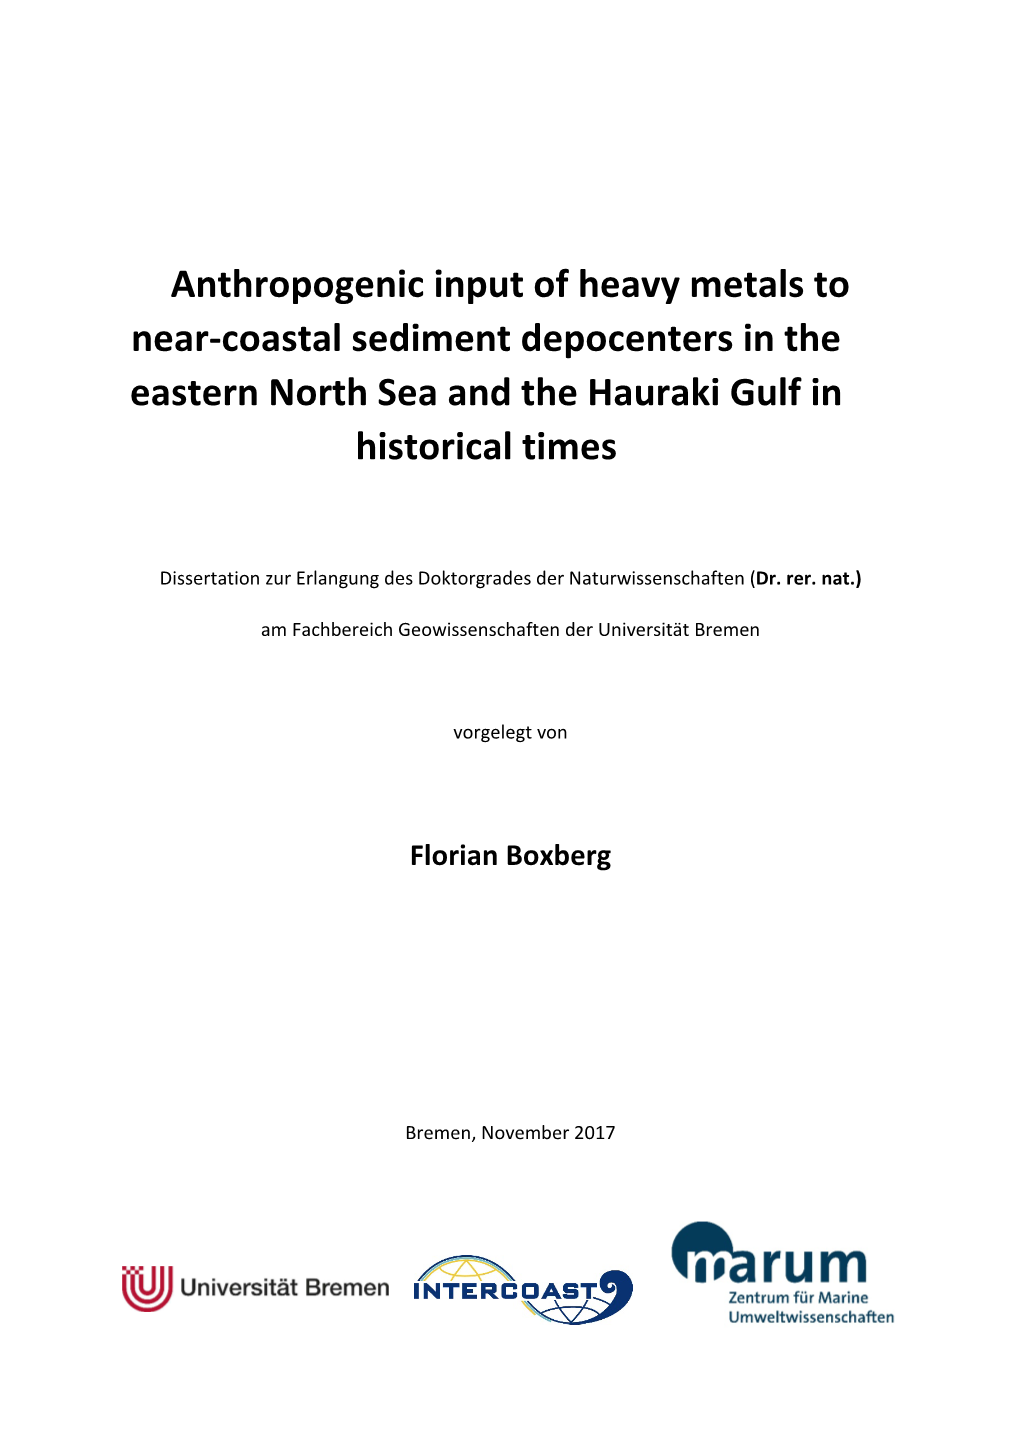 Anthropogenic Input of Heavy Metals to Near-Coastal Sediment Depocenters in the Eastern North Sea and the Hauraki Gulf in Historical Times